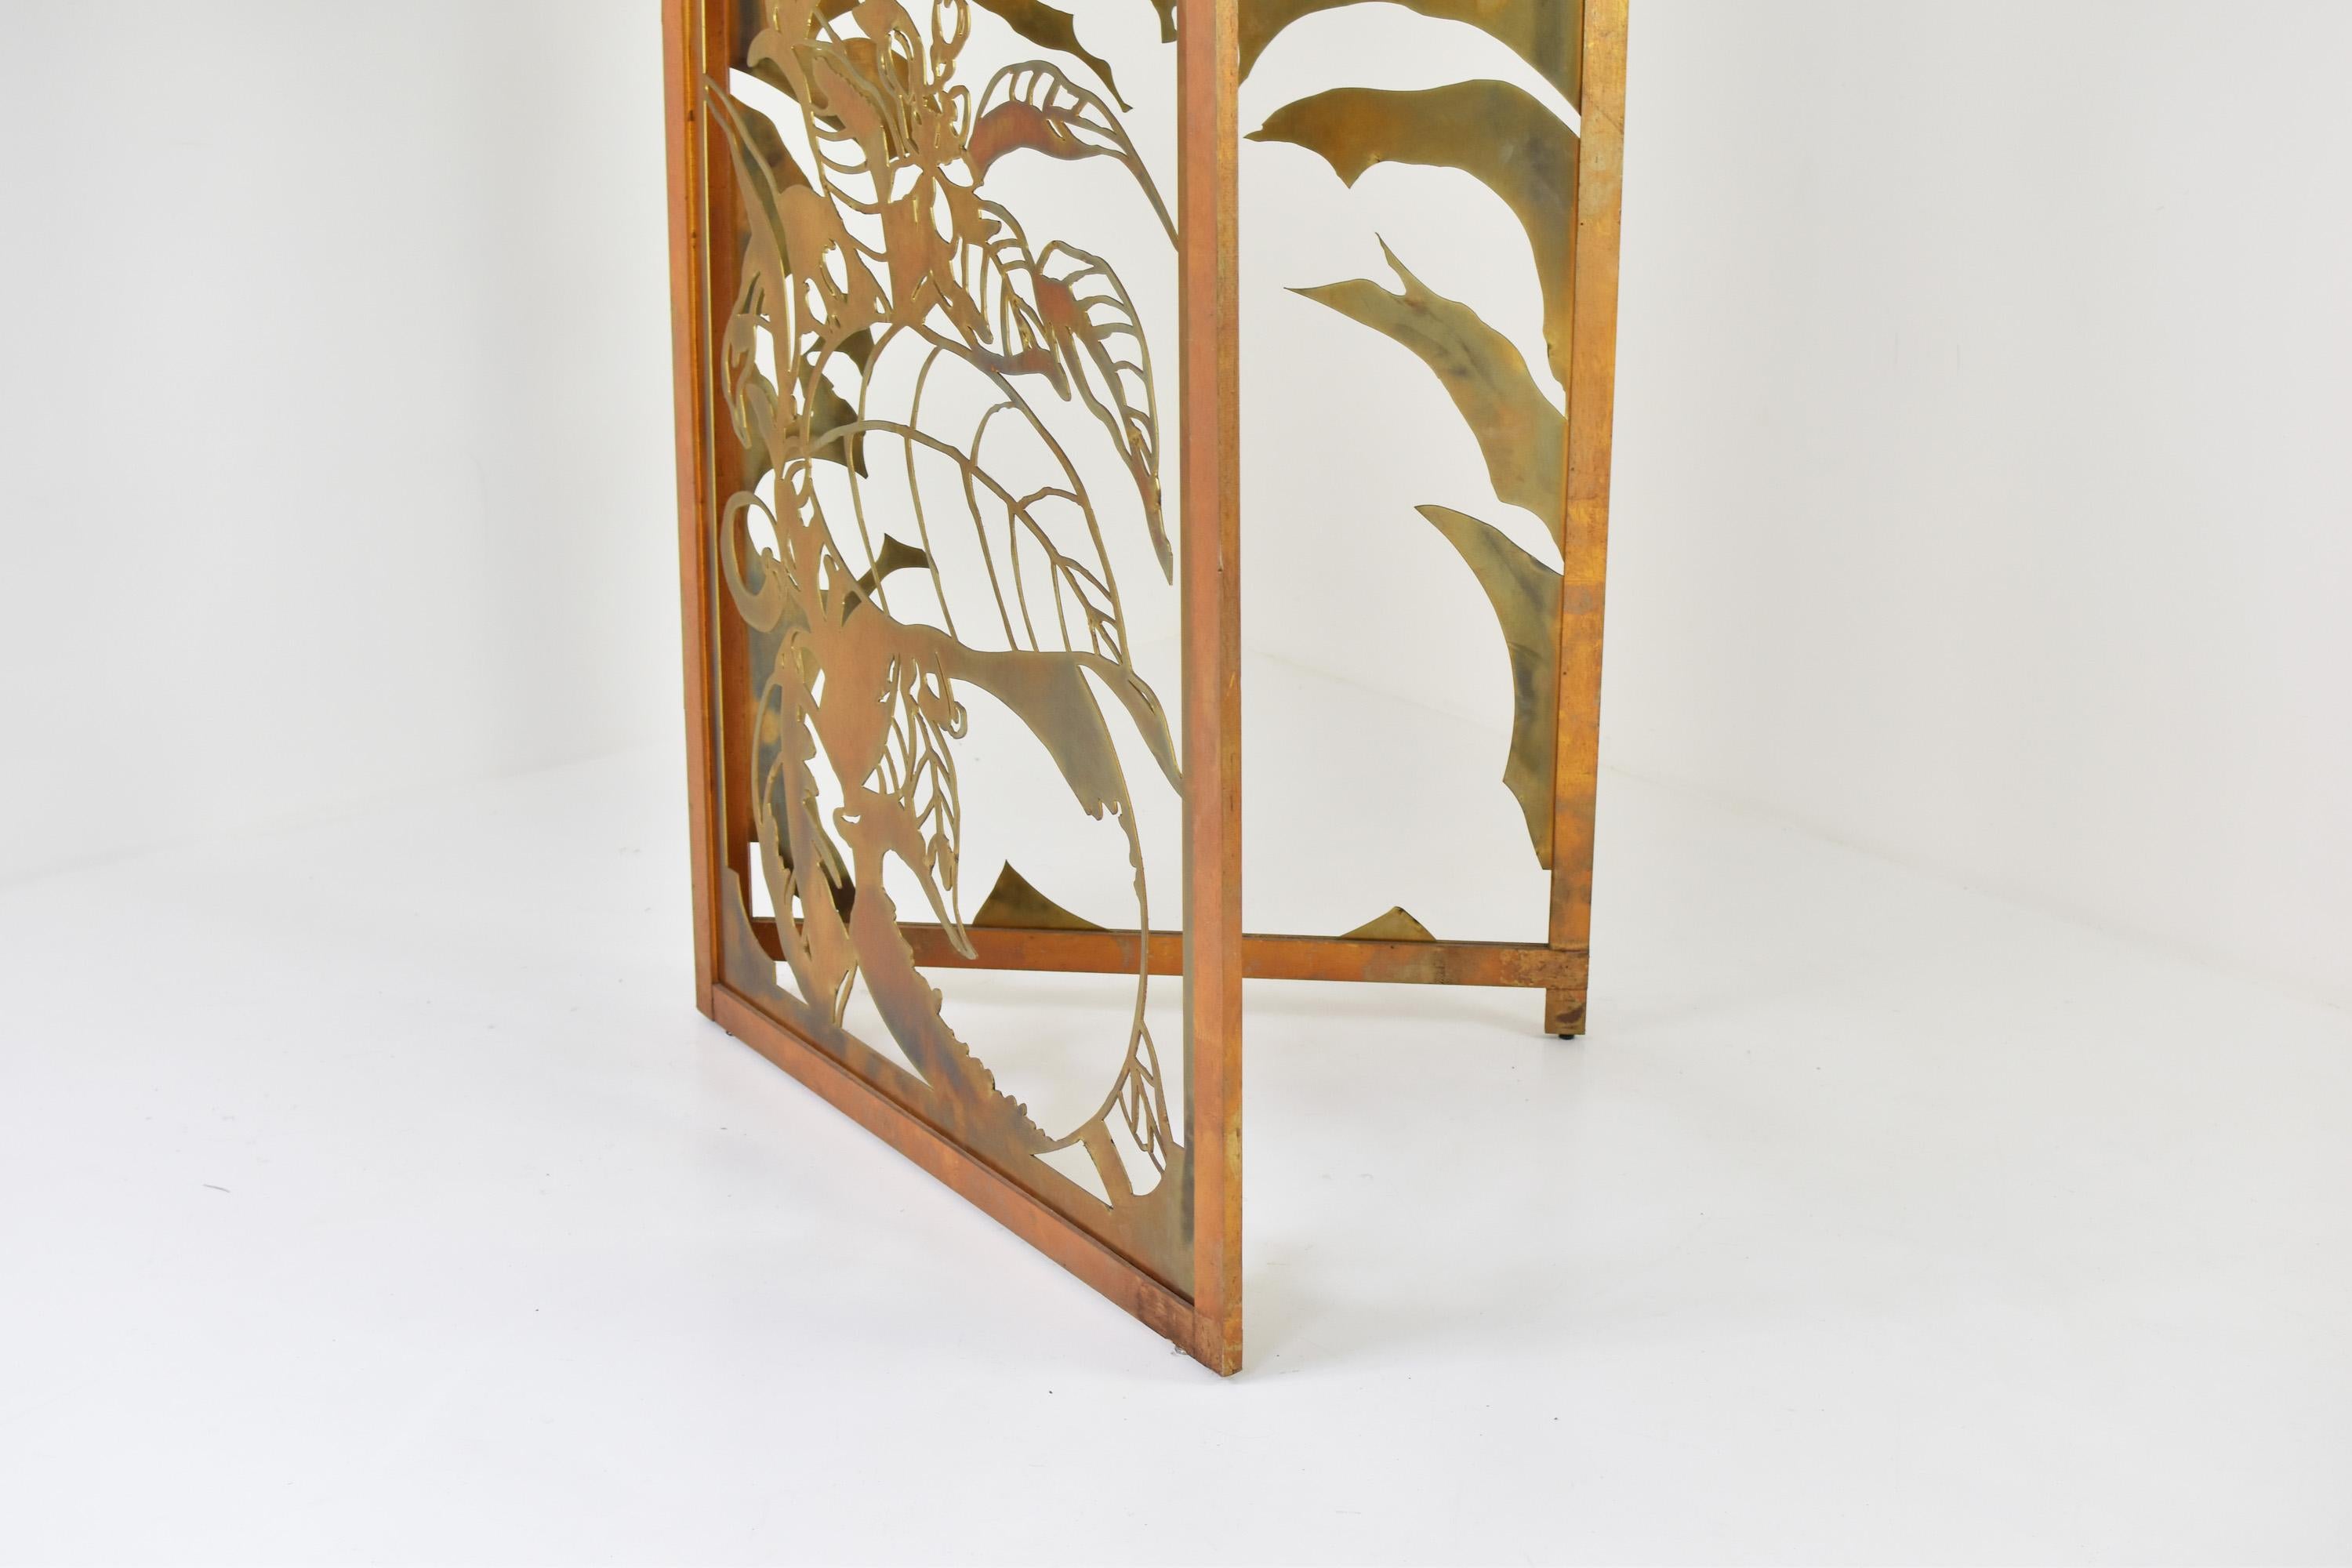 Exclusive decorative folding screen designed for Belgian fashion designer Dries Van Noten in the 1980's. A limited edition of 11 screens where made and exclusively here for sale. Each screen is custom made and unique shaped. Made out of laser-cut